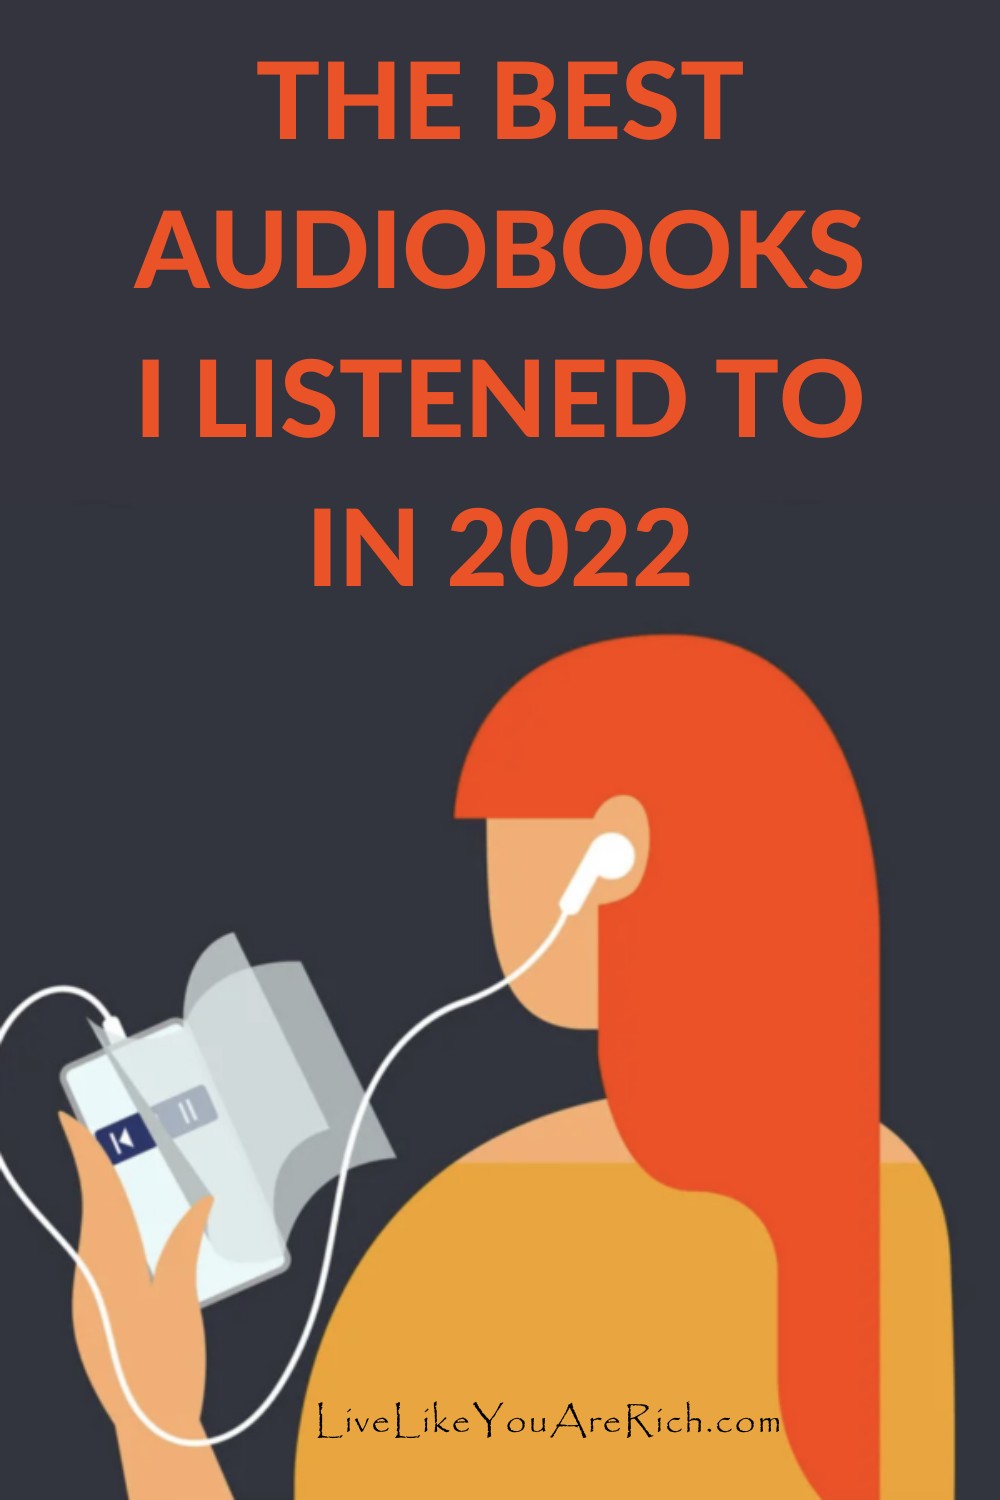 250 Audiobooks That I Listened to in 2022